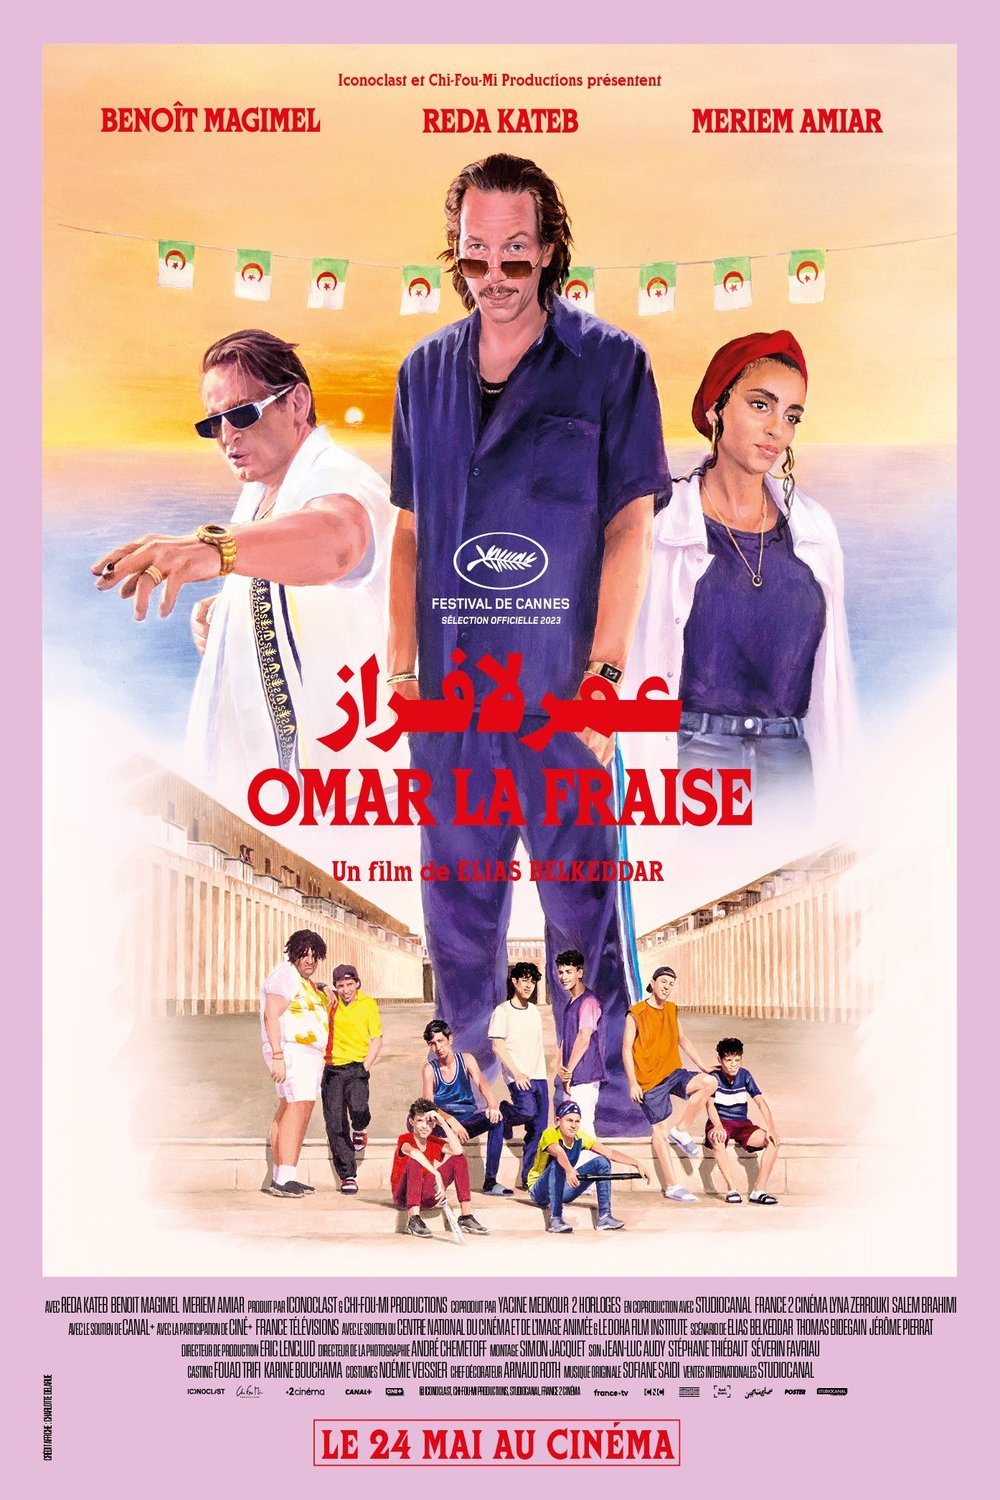 Poster of the movie Omar la fraise